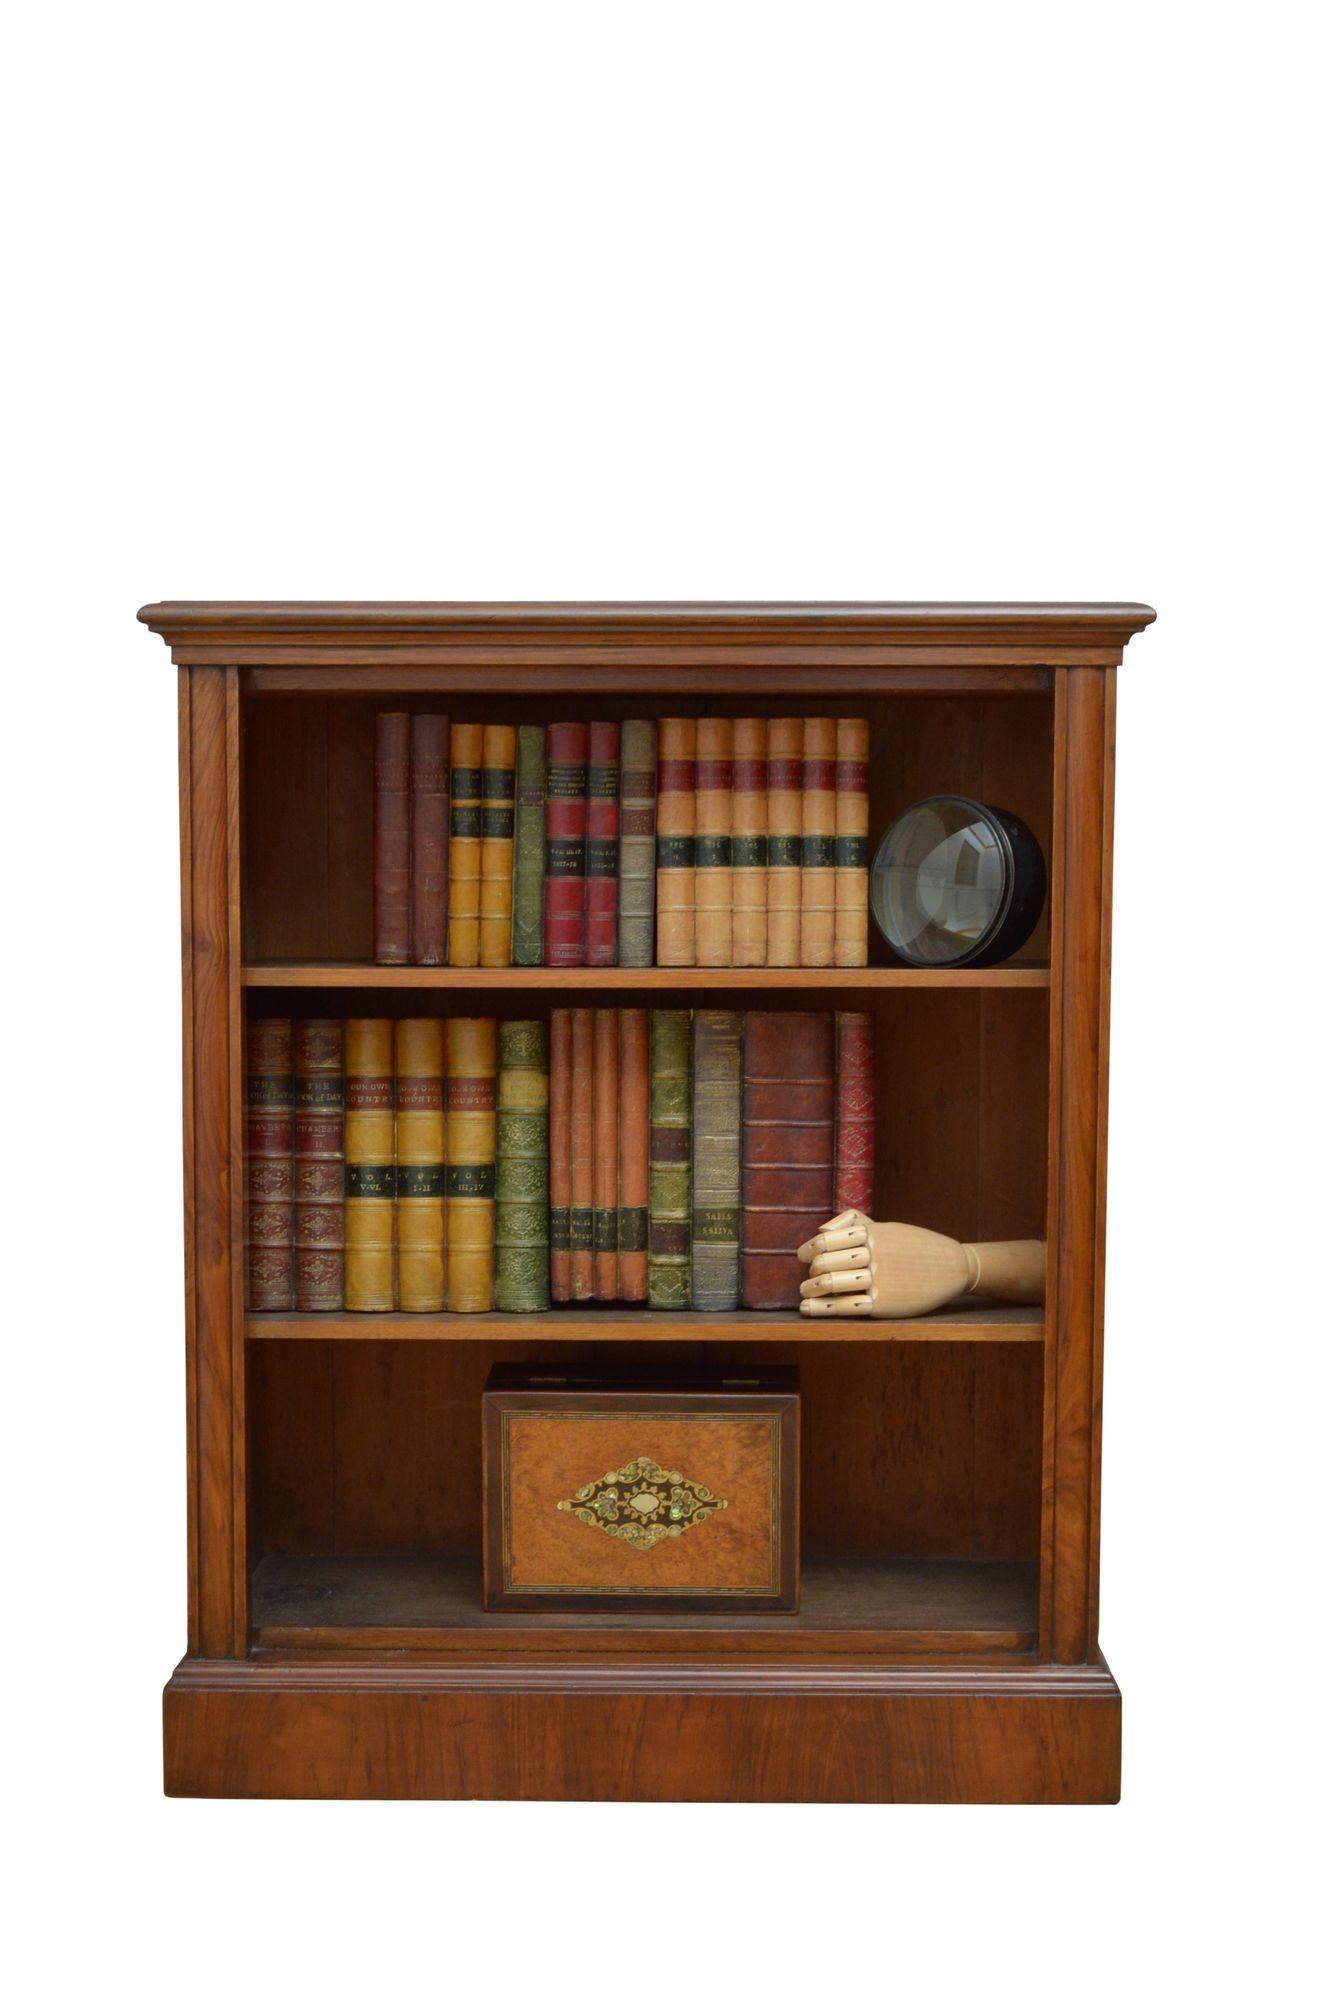 K0615 Fine quality and very attractive Victorian bookcase in walnut, having figured walnut top with moulded edge above two height adjustable shelves flanked by convex shaped pilasters, all standing on moulded plinth base. This antique bookcase is in